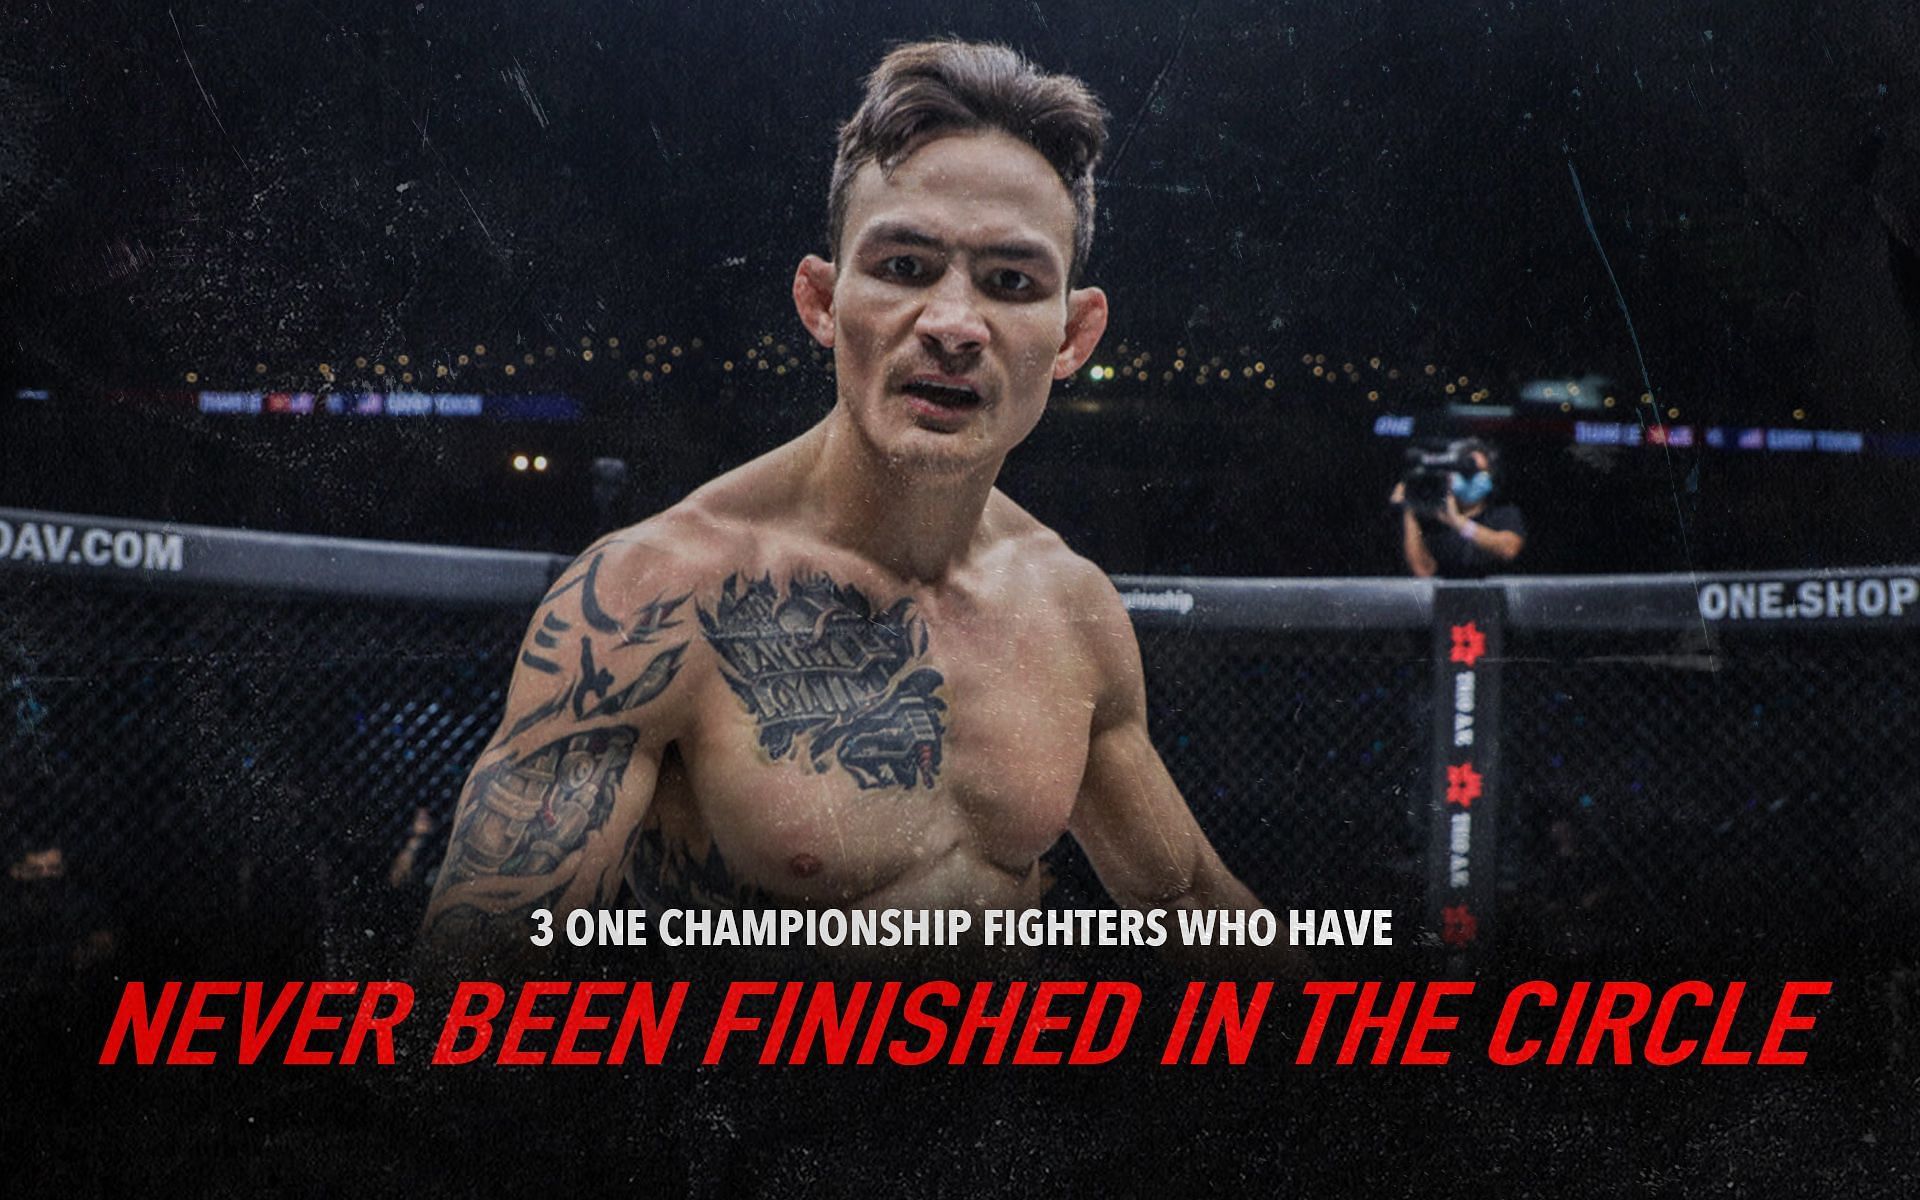 Thanh Le is among the fighters who have not been finished in the Circle. | [Photo: ONE Championship]